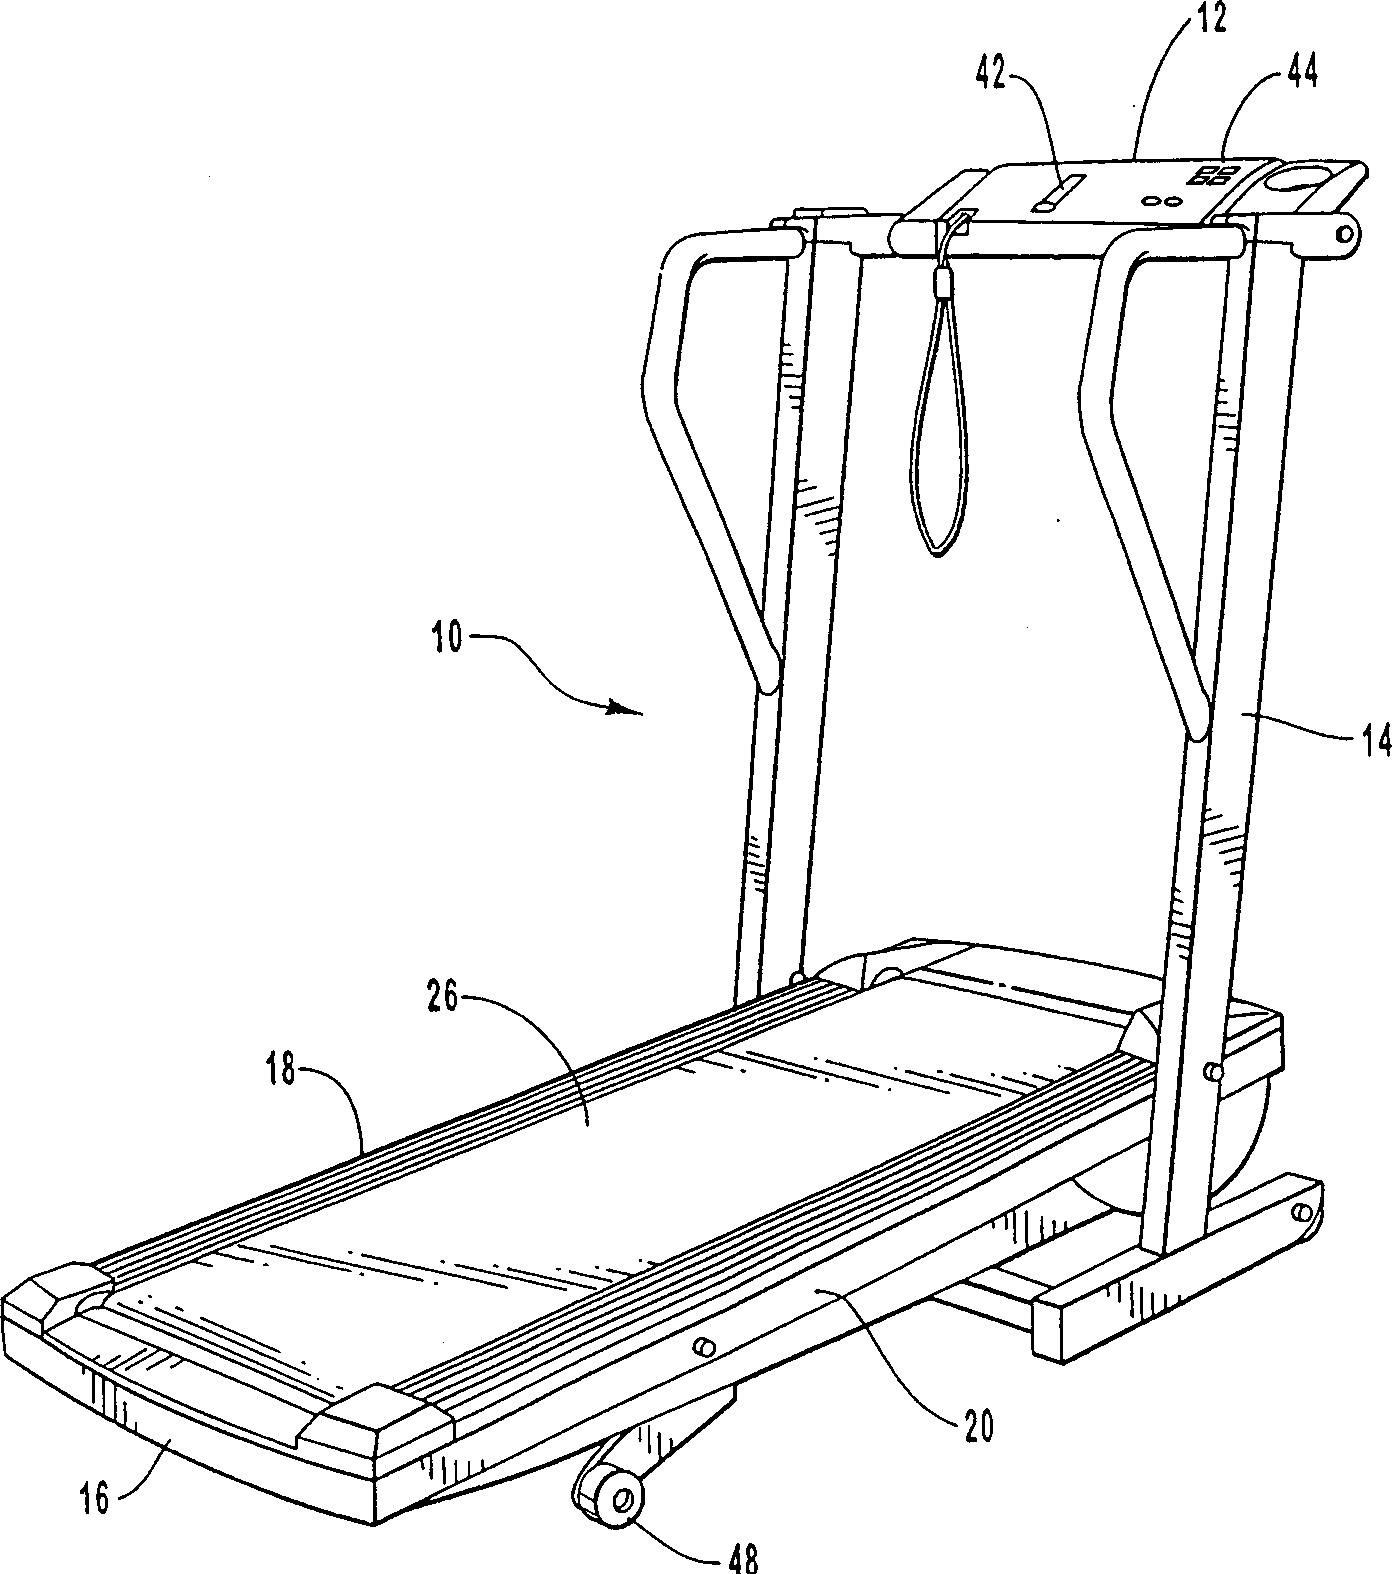 System and methods for providing improved exercise device with motivational programming